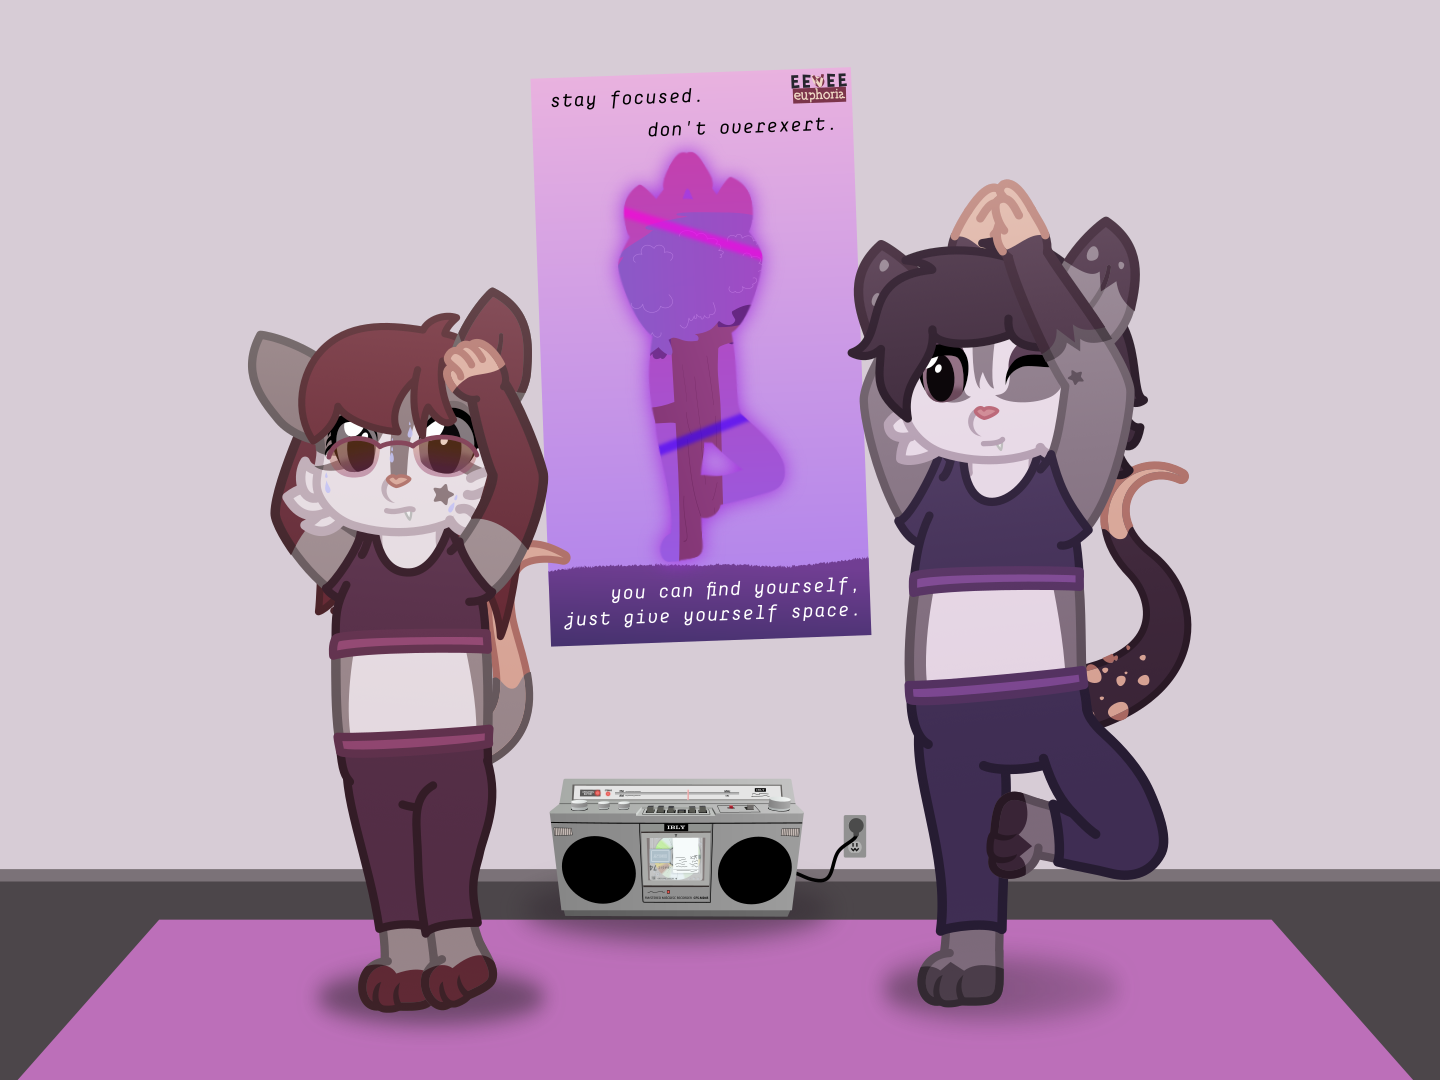 two possums are doing tree pose yoga, with one struggling to balance her leg on the other. in the background there is a boombox playing a minidisc, and above it as a poster of someone doing the tree pose, with text that says 